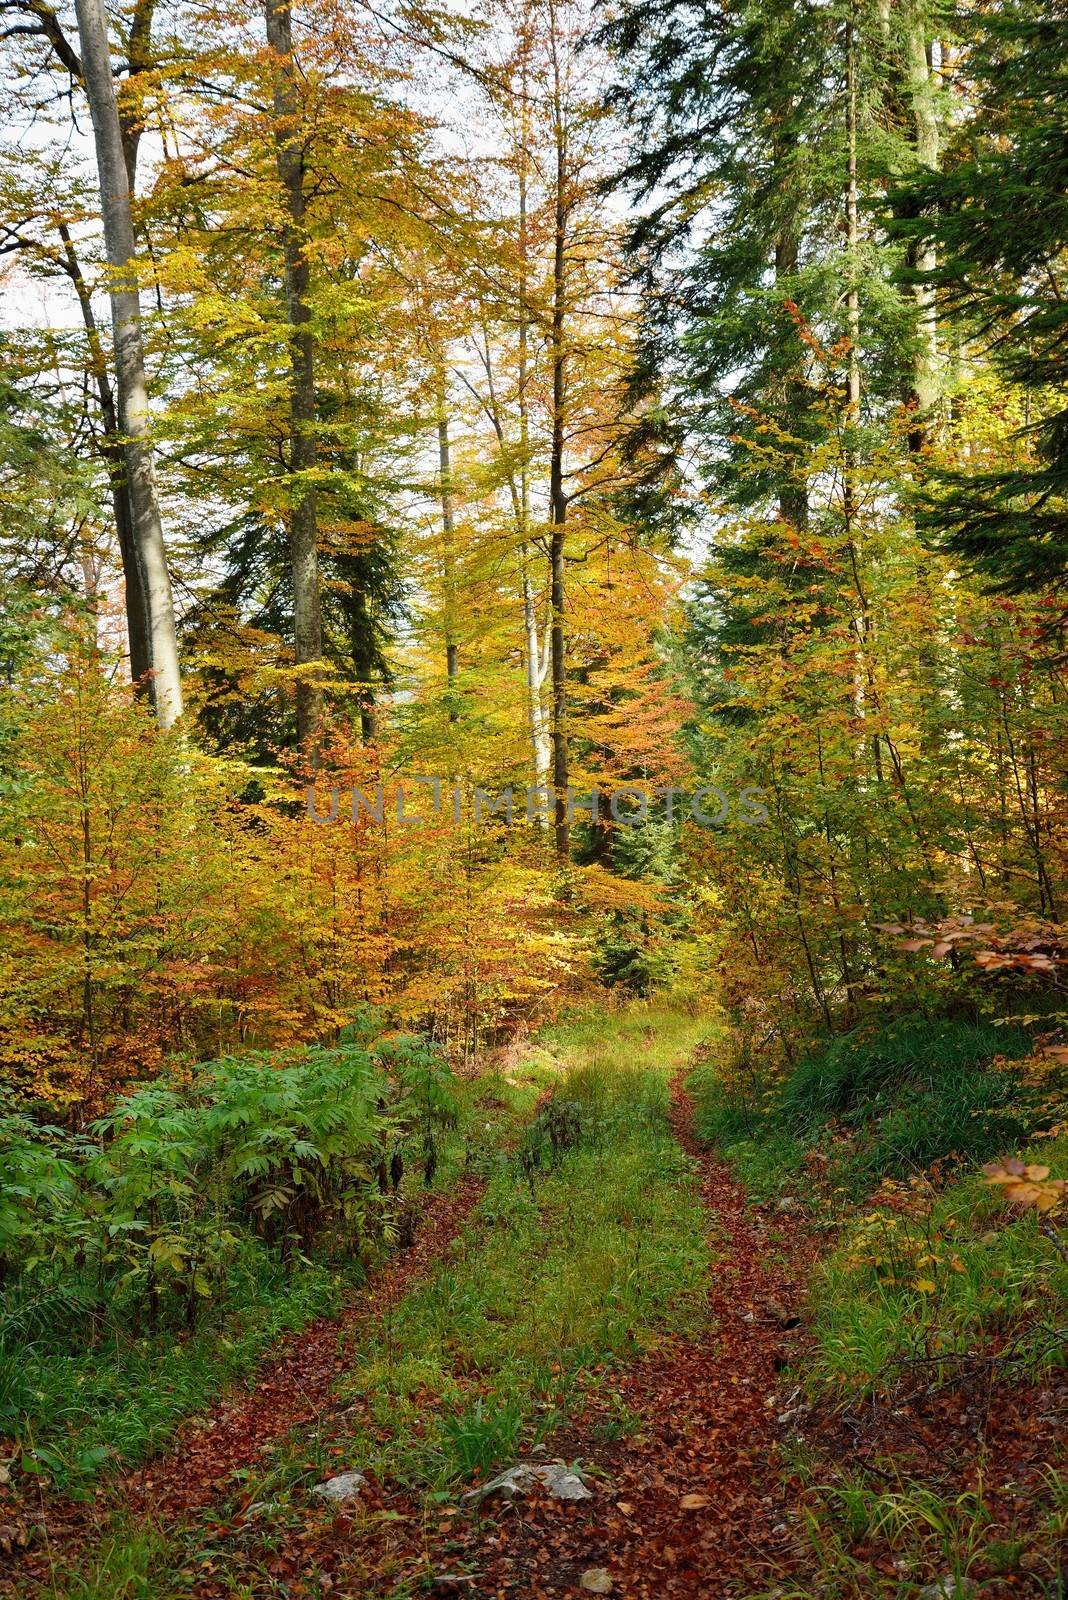 Autumn Colorful Trees in Mountain Forest with Small Path